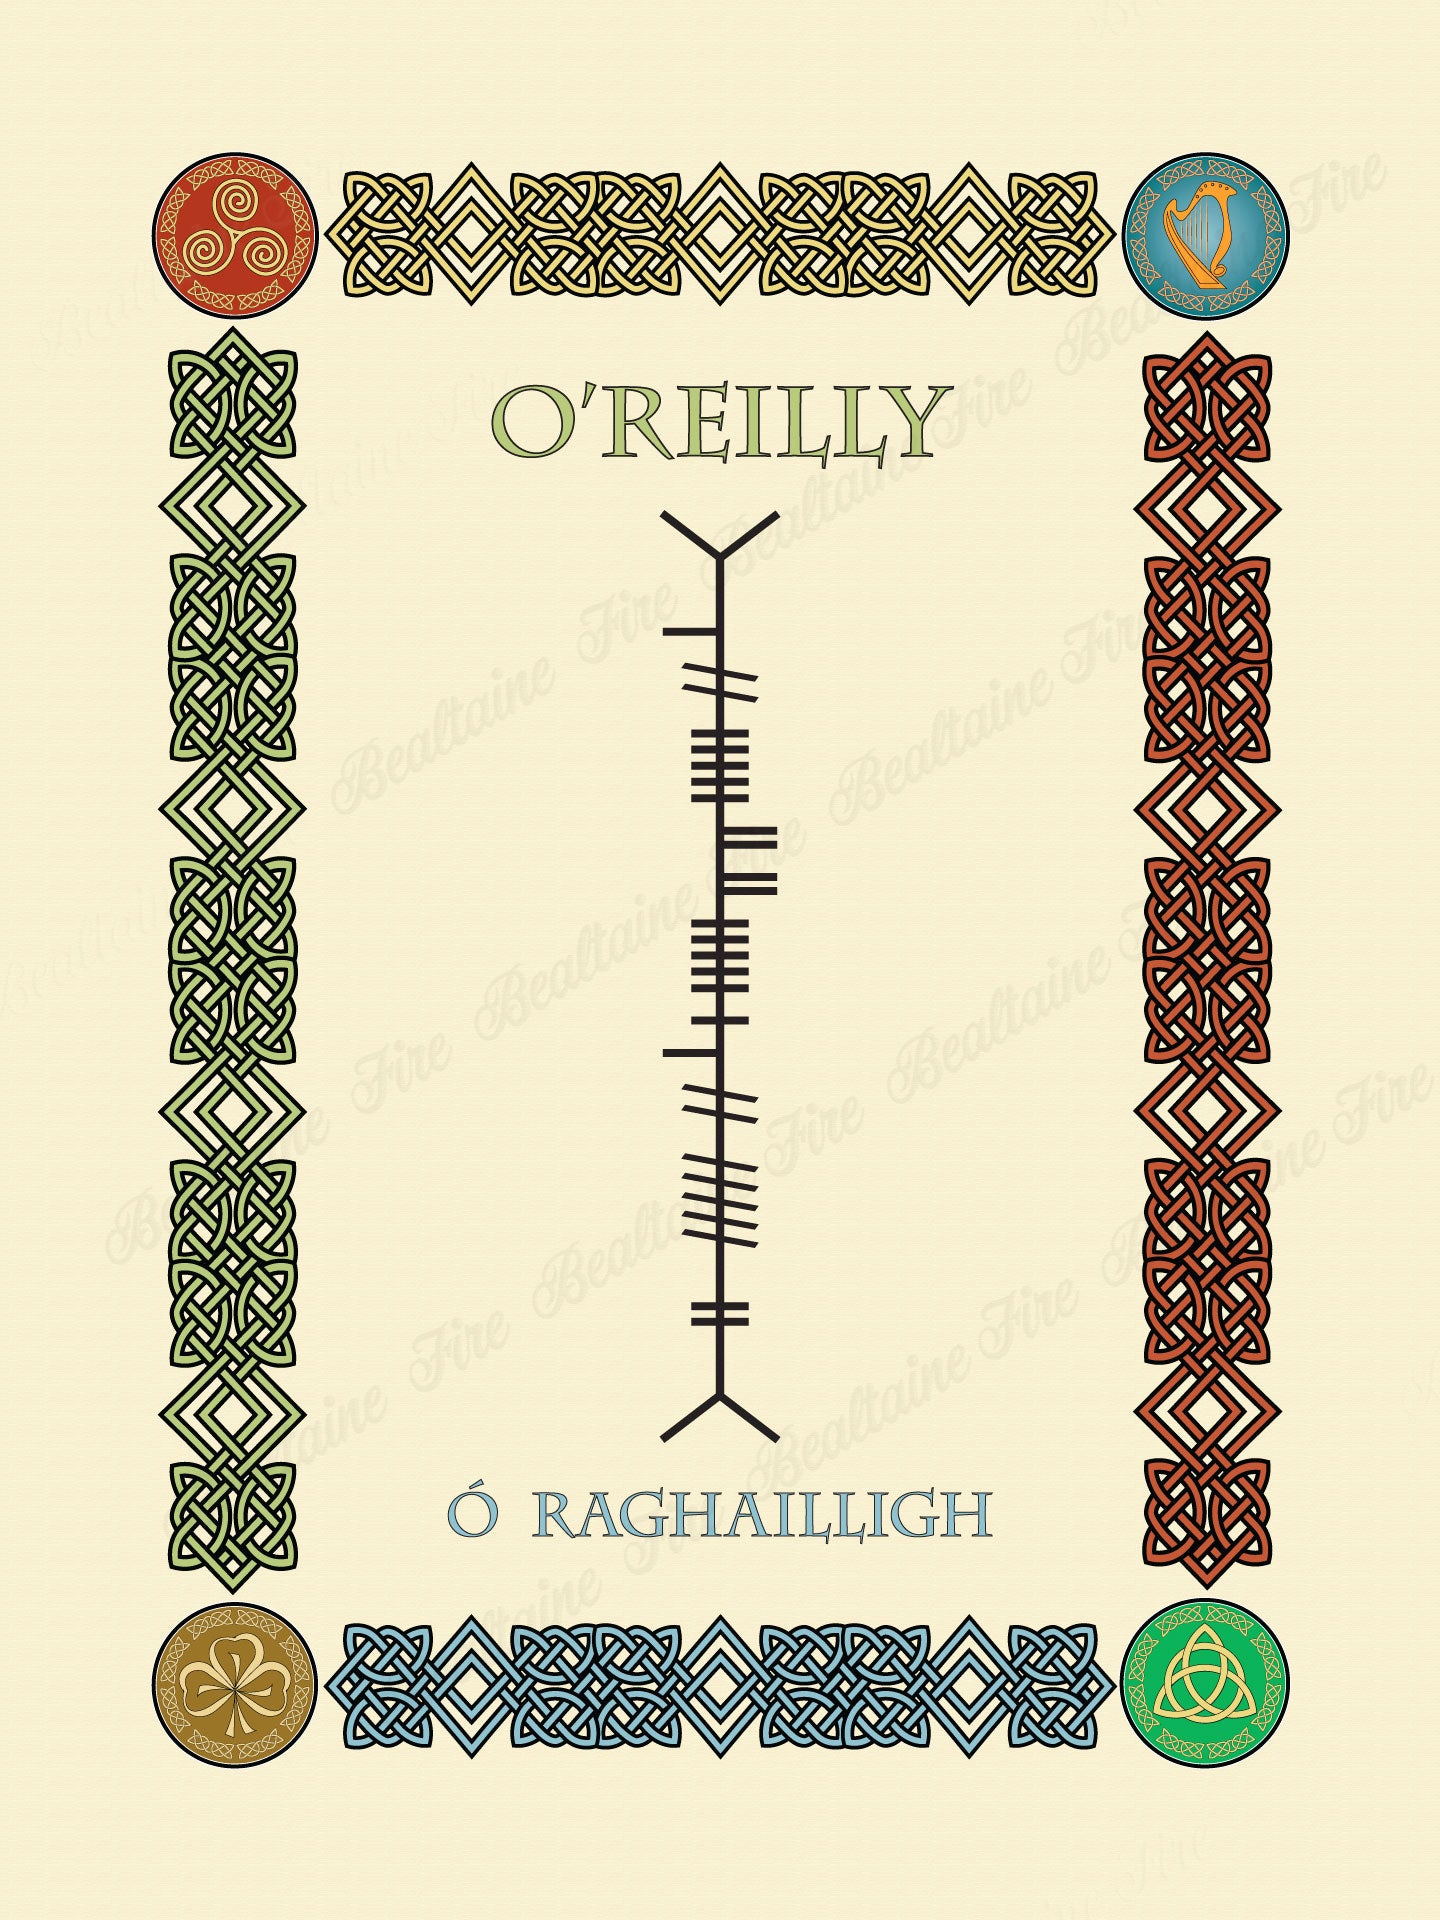 O'Reilly in Old Irish and Ogham - Premium luster unframed print